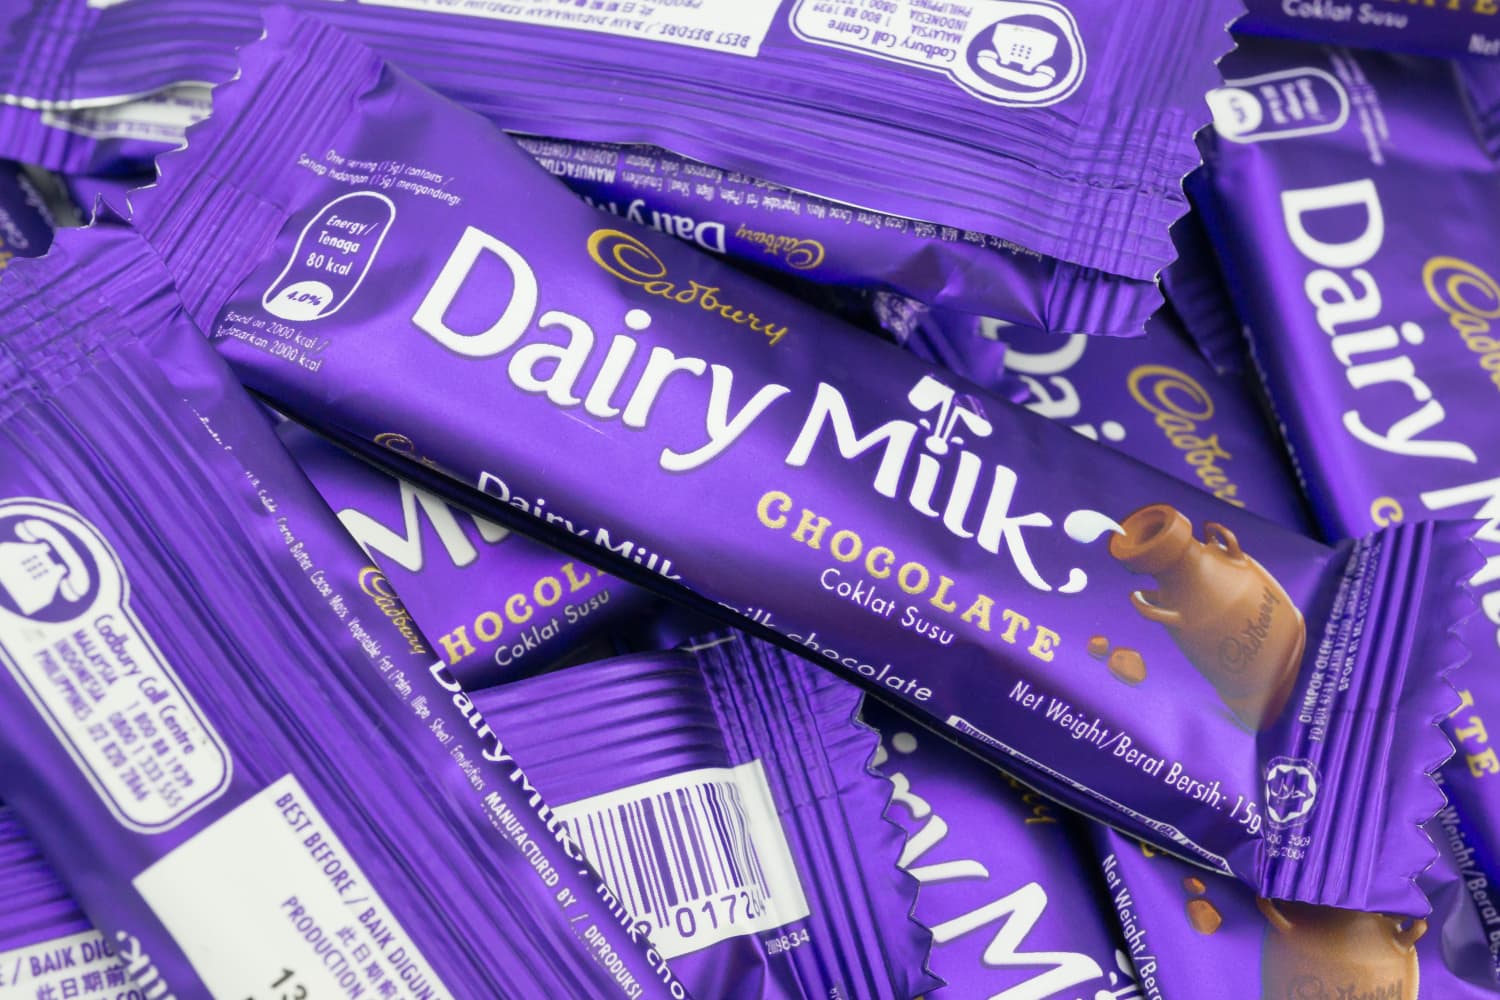 Buy All Cadbury Products Online In The USA– British Food Supplies